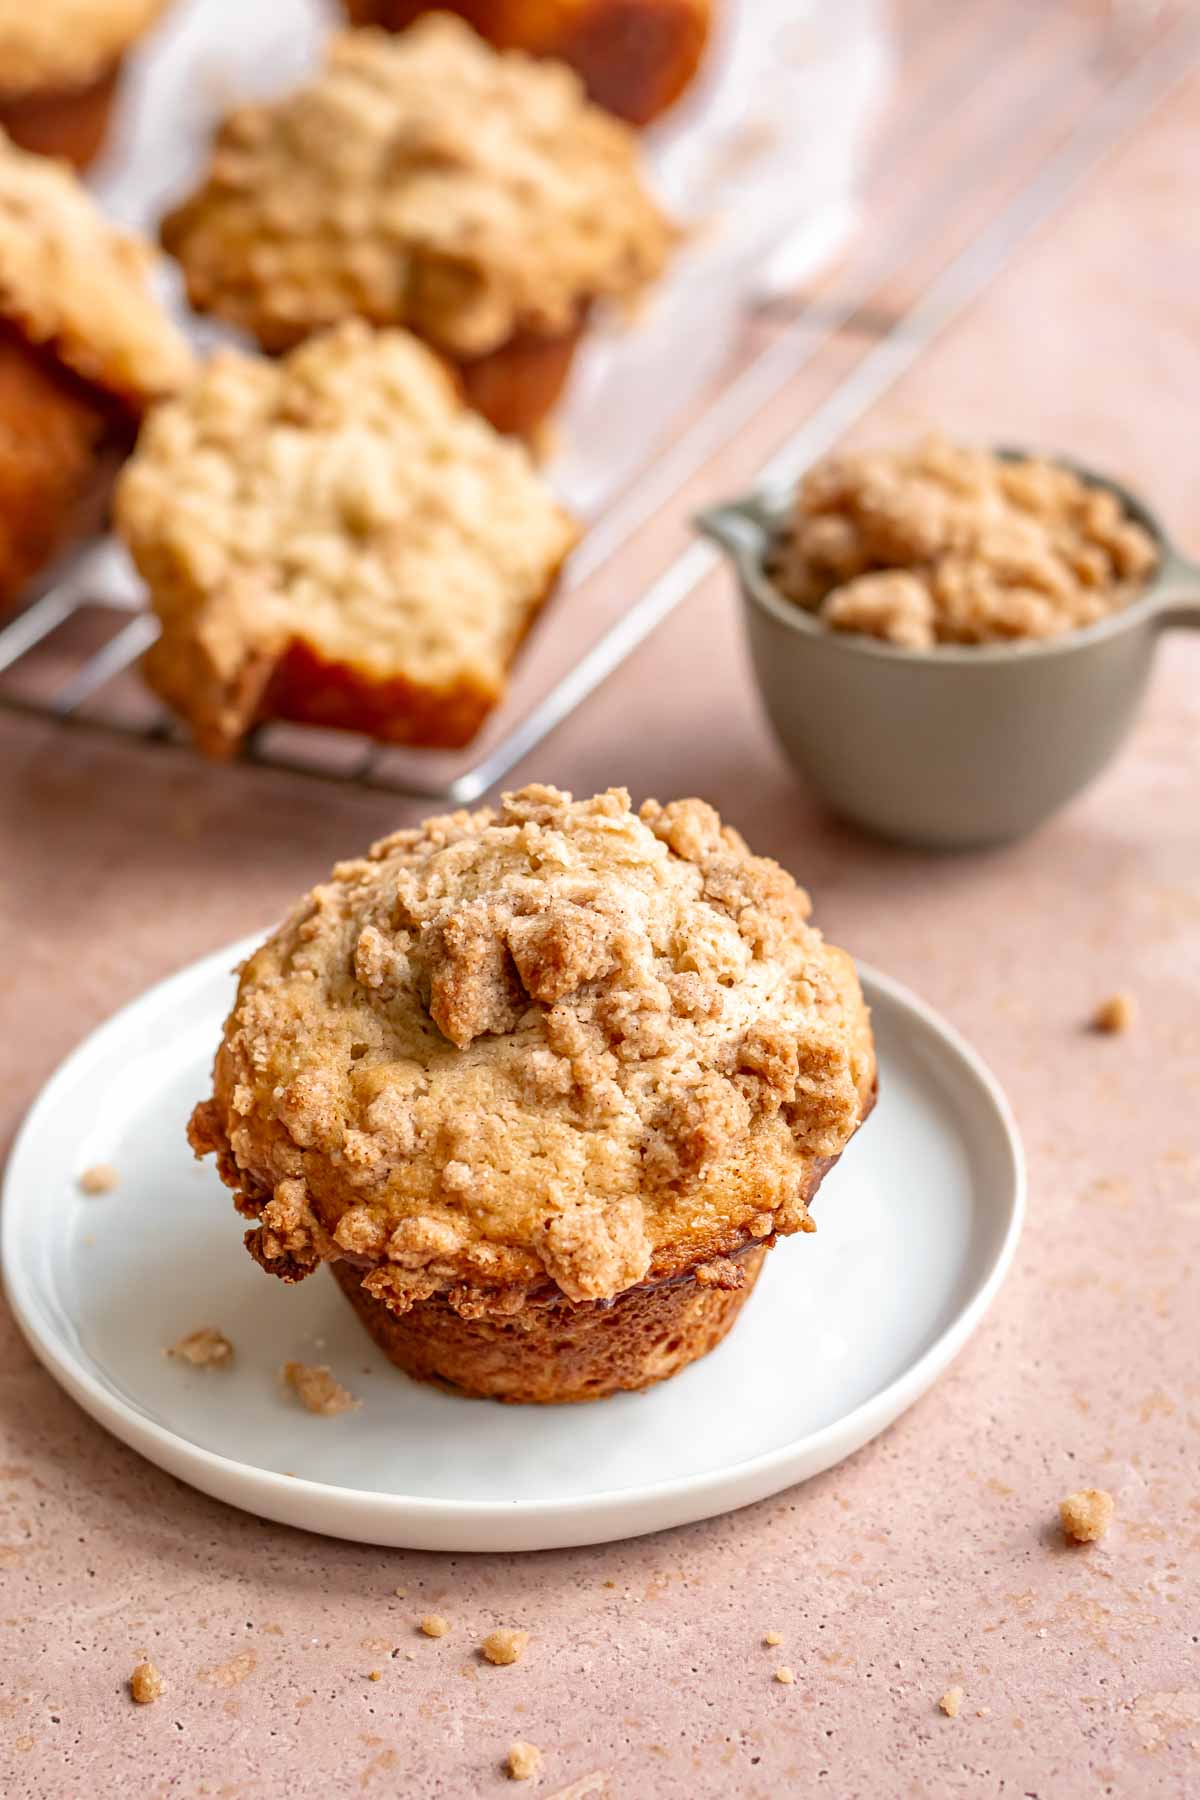 Cinnamon streusel muffin on a plate.